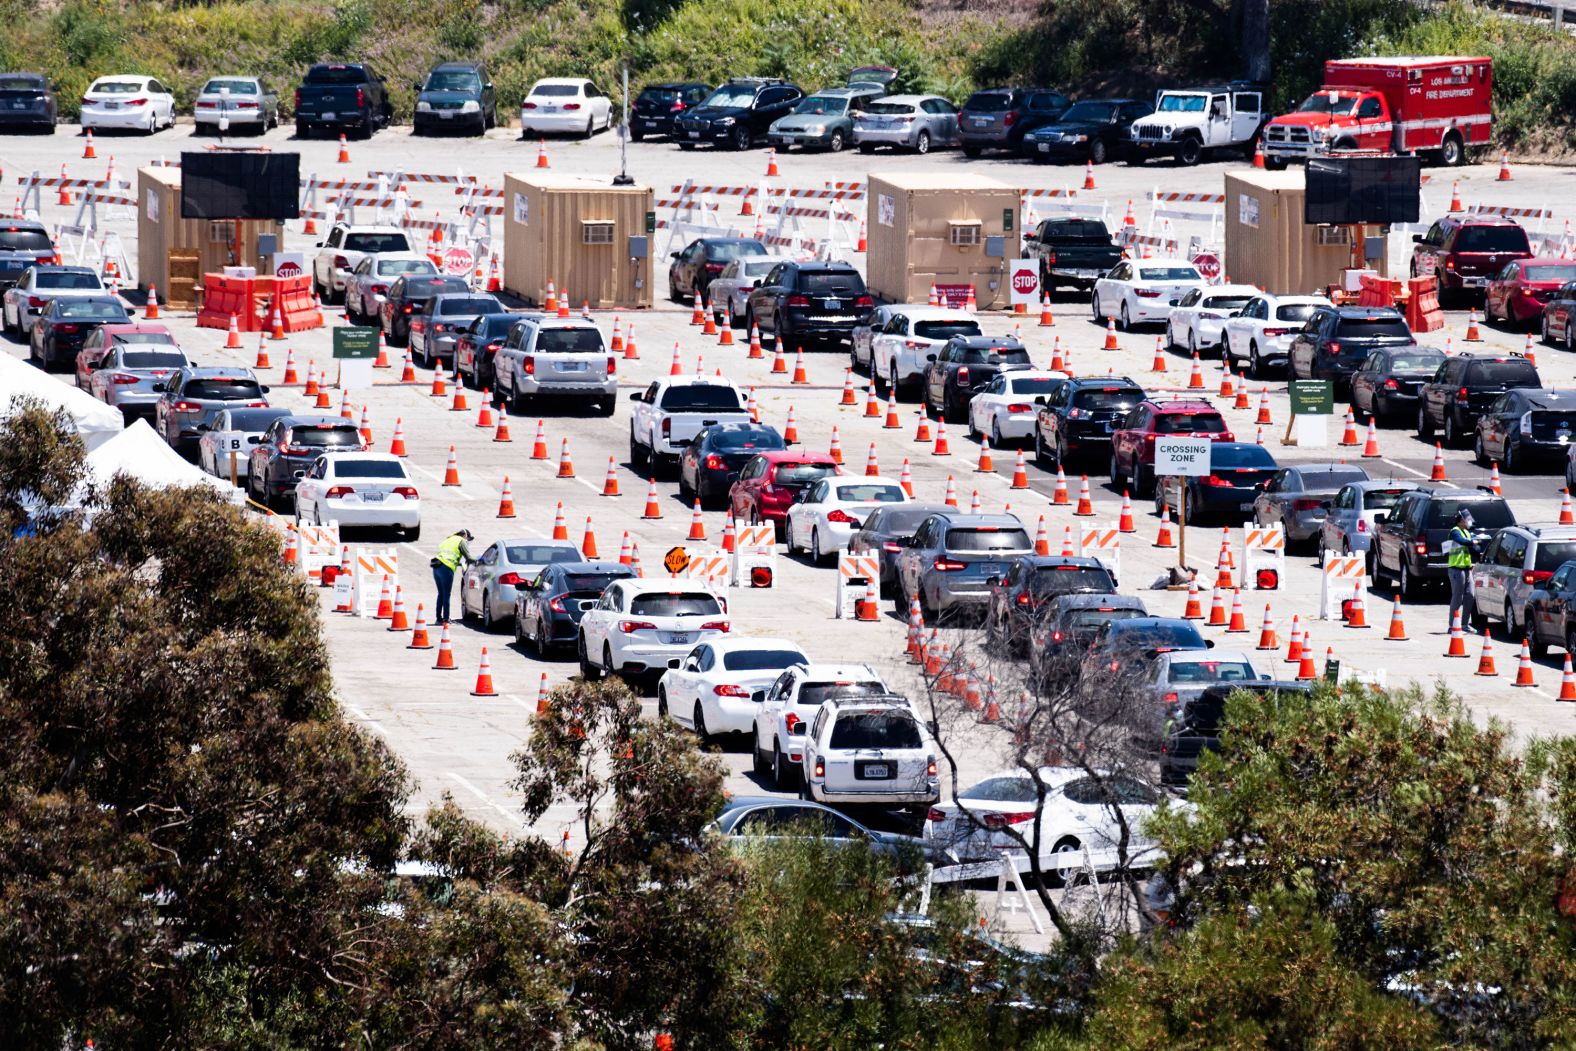 Vehicles line up for Covid-19 testing at Los Angeles' Dodger Stadium in June.